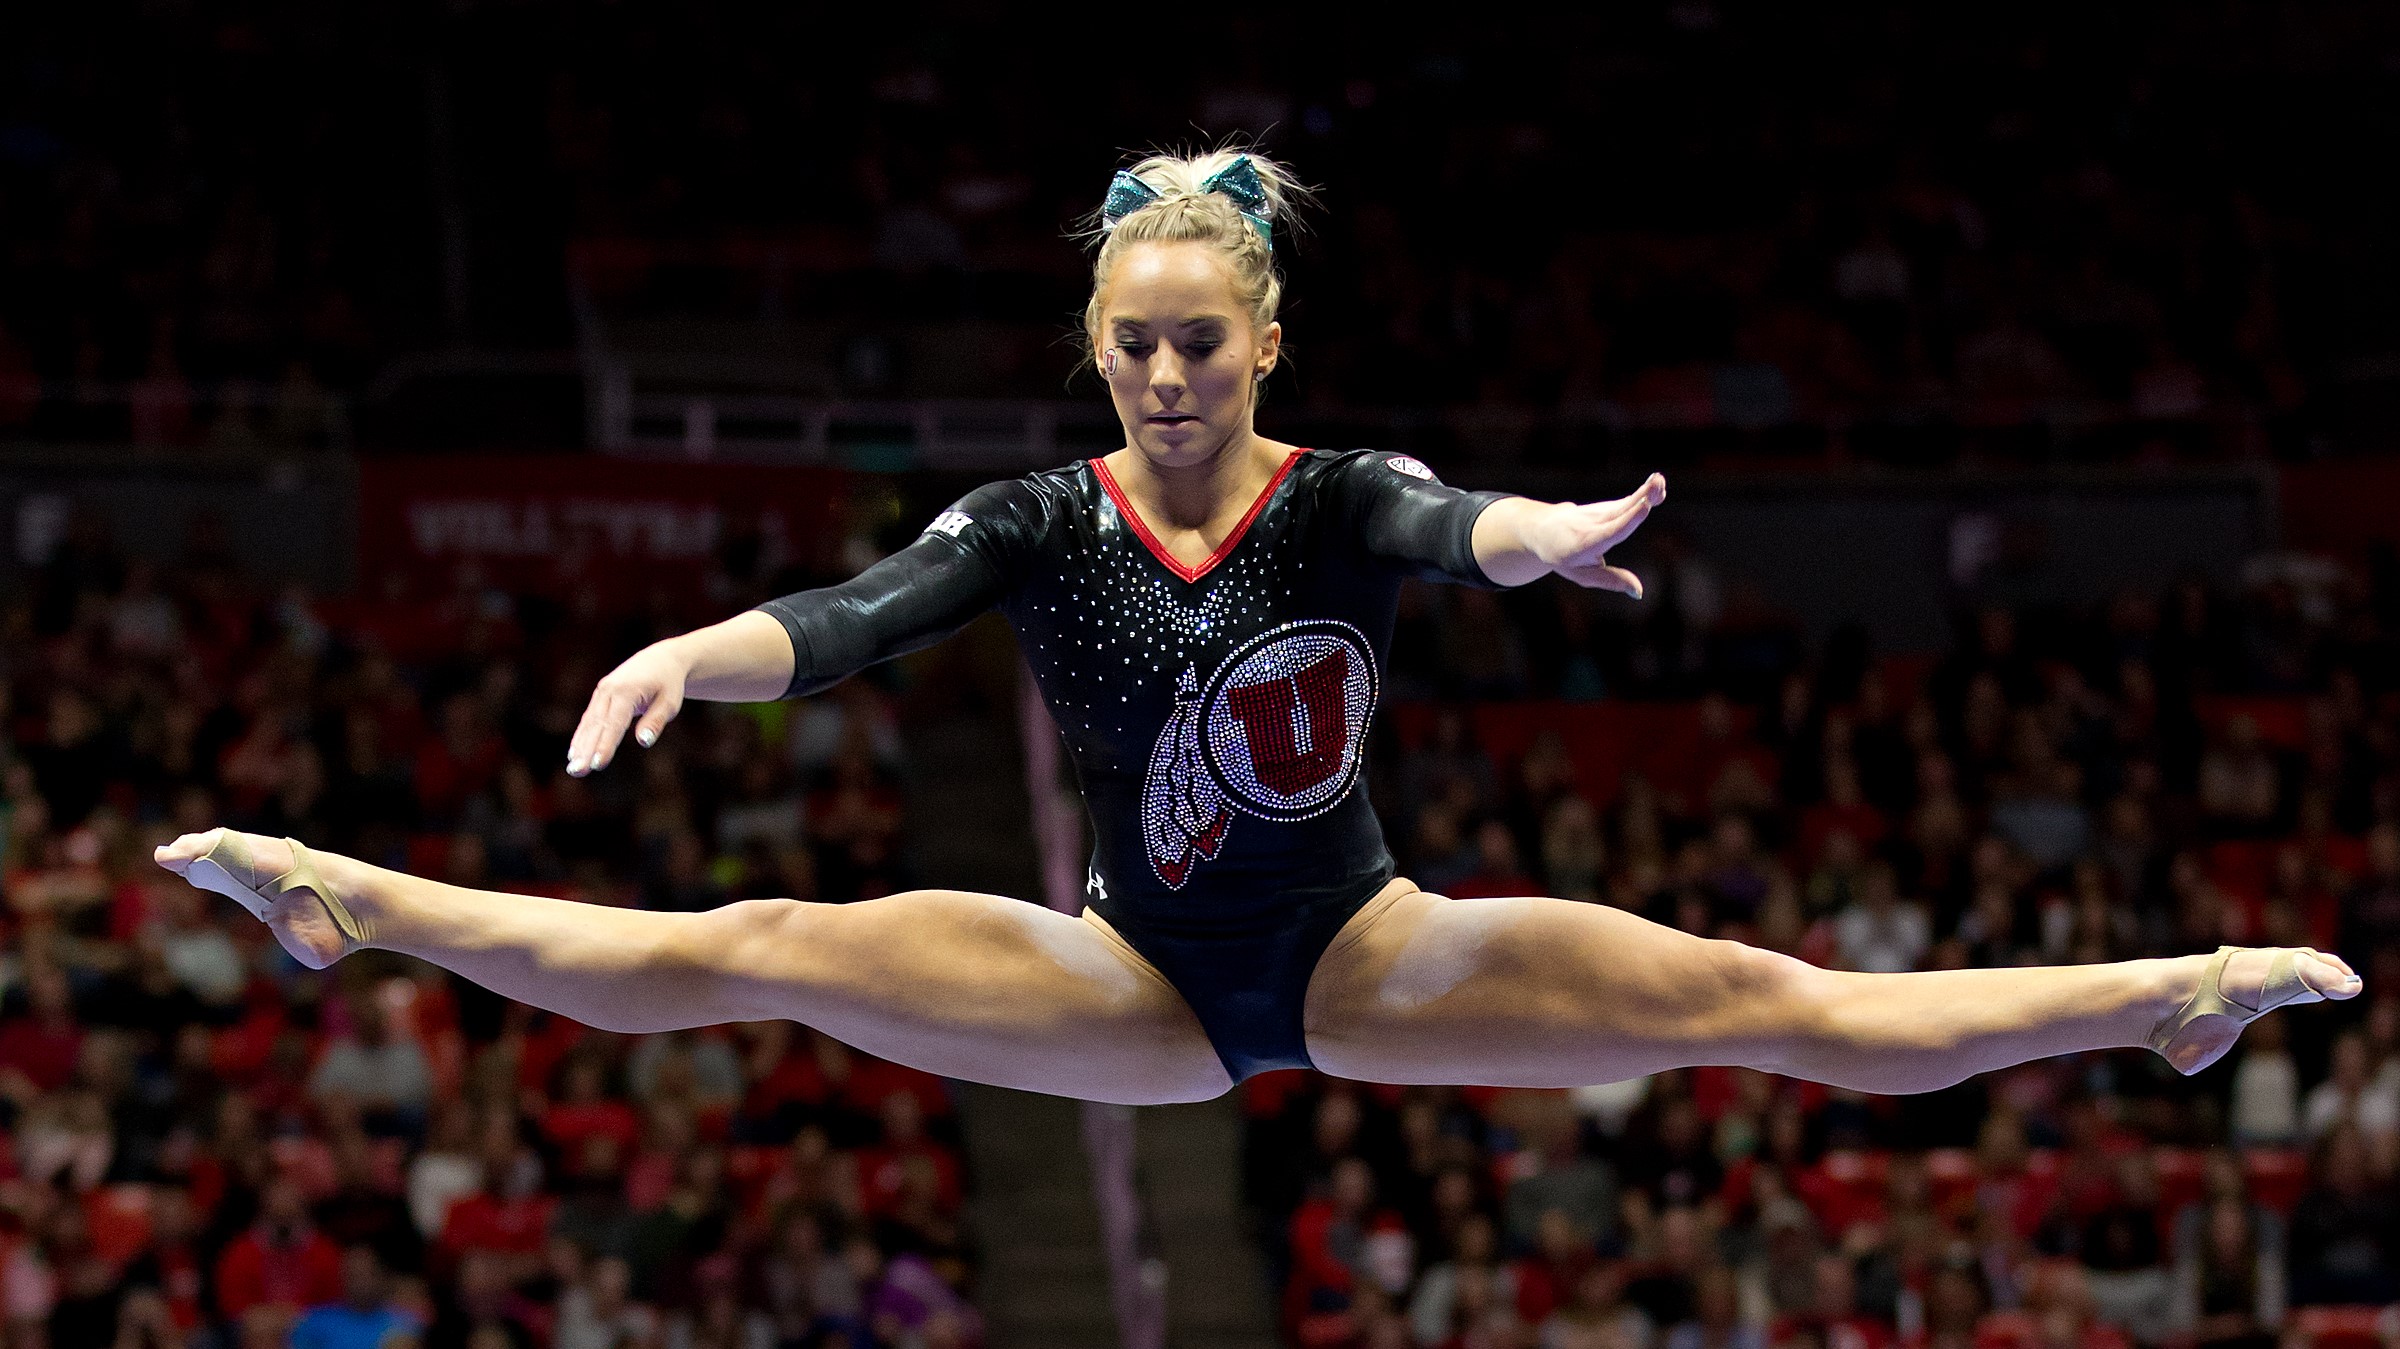 Gymnastics Video: Utes pay tribute to a successful season - Sports